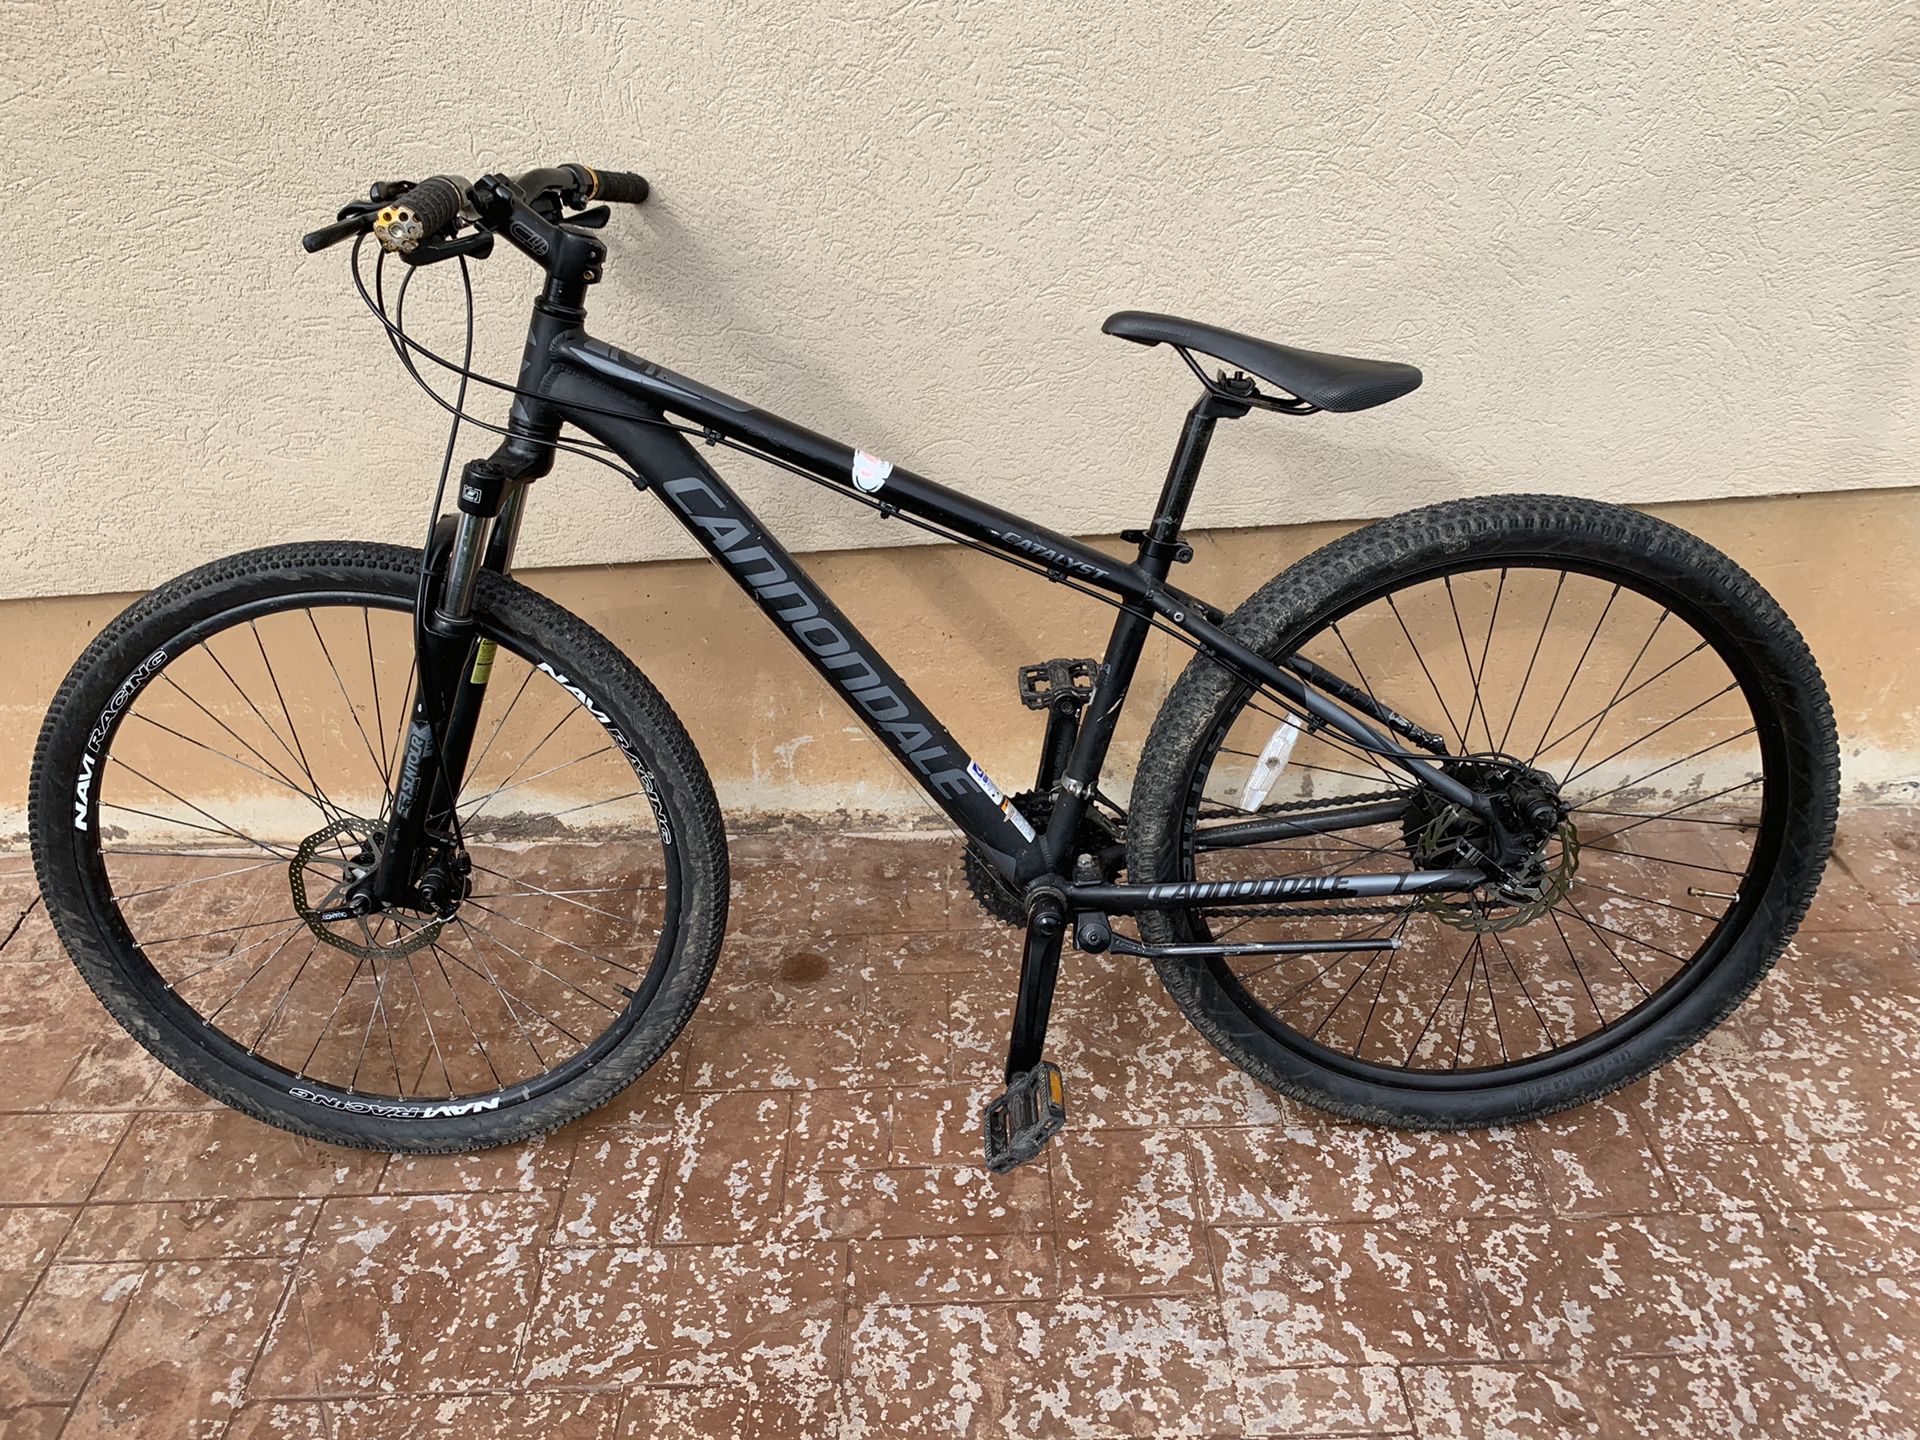 Cannondale catalyst mountain bike is